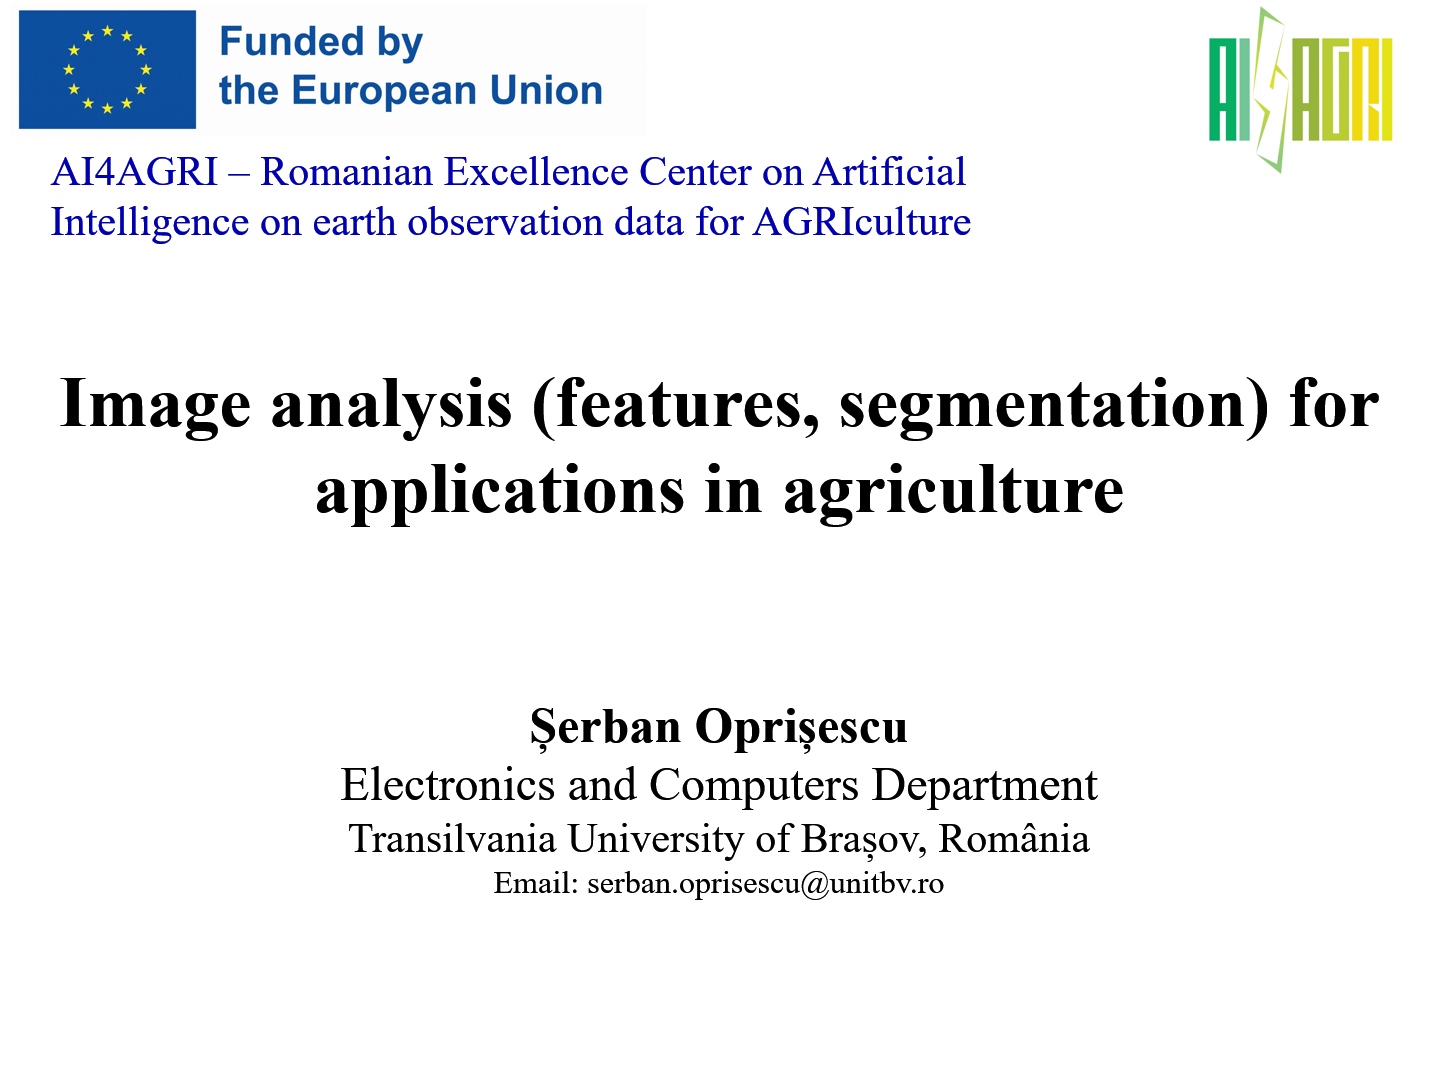 Image analysis (features, segmentation) for applications in agriculture